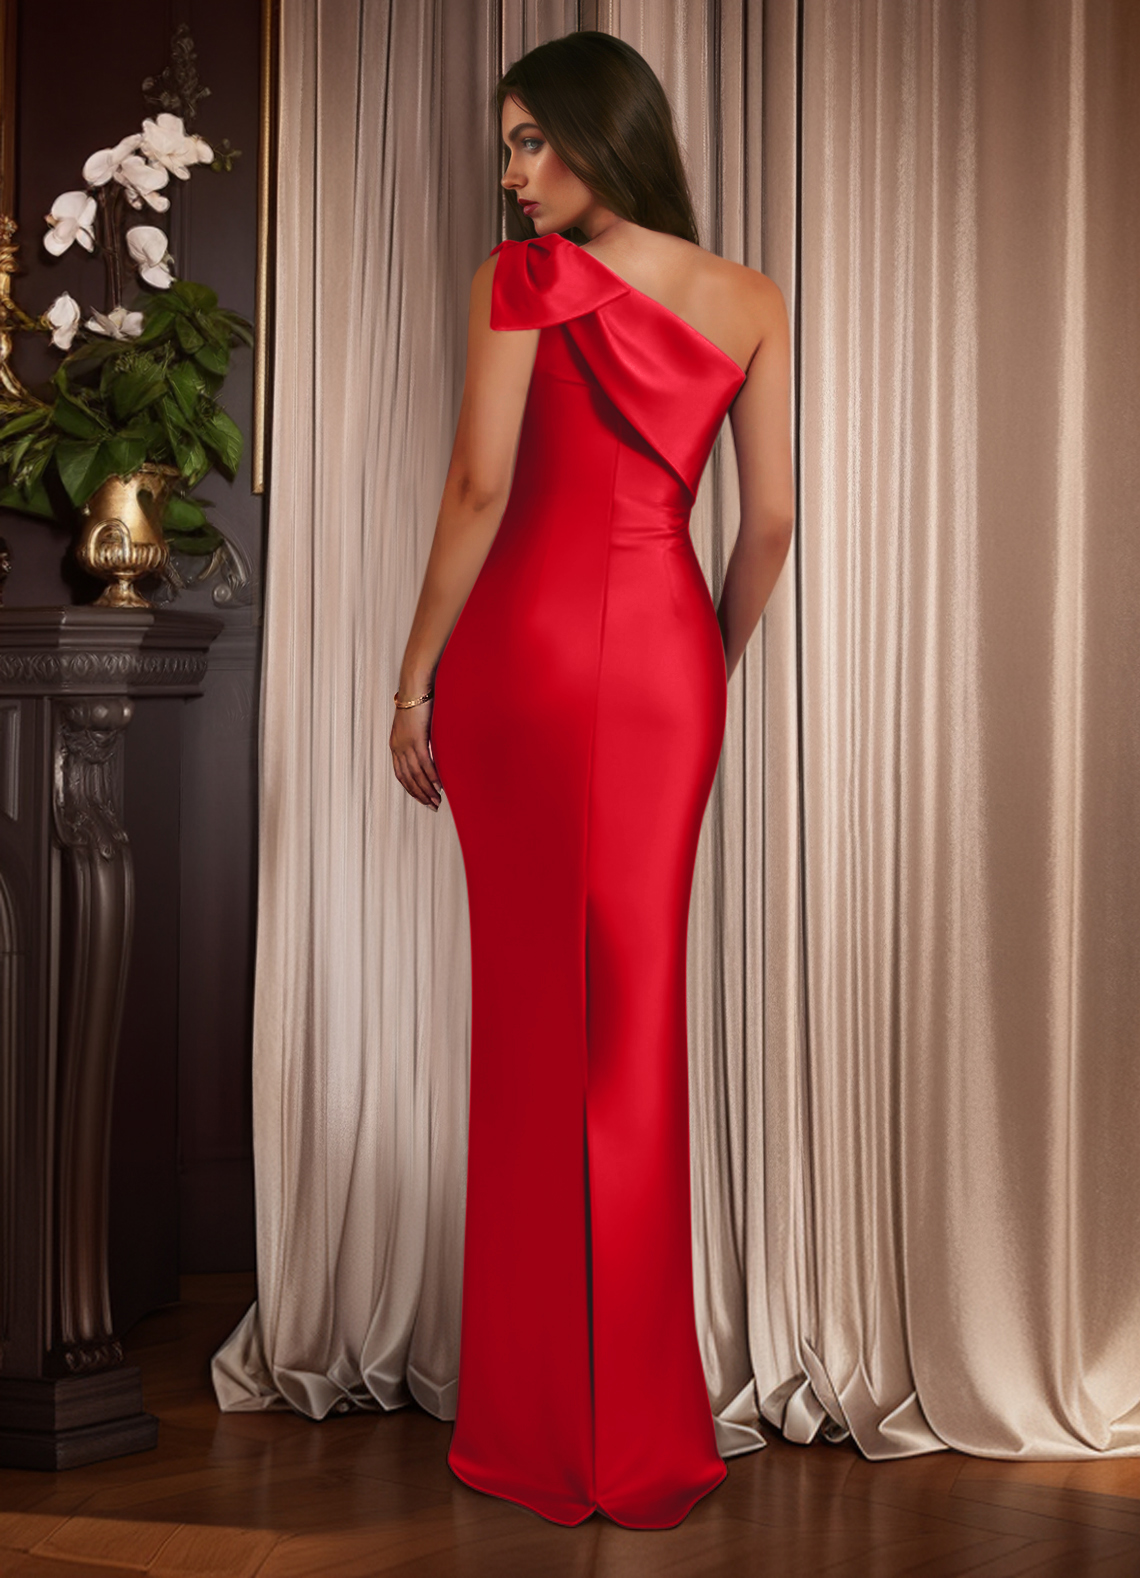 Sheath/Column One-Shoulder Sleeveless Satin Prom Dresses With Bow(s)